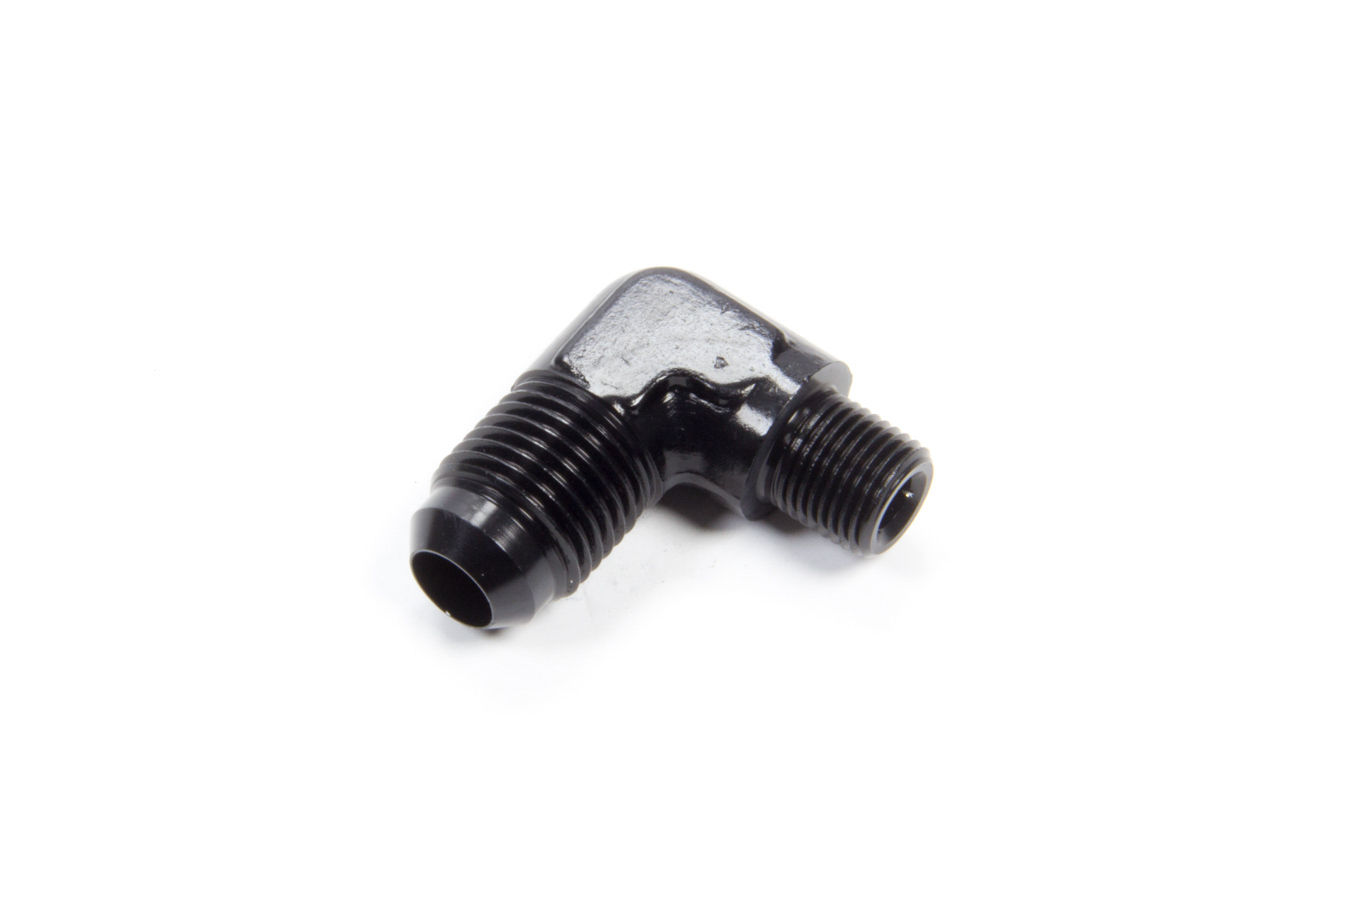 Aeroquip FCM5033 Fitting, Adapter, 90 Degree, 6 AN Male to 1/8 in NPT Male, Aluminum, Black Anodized, Each